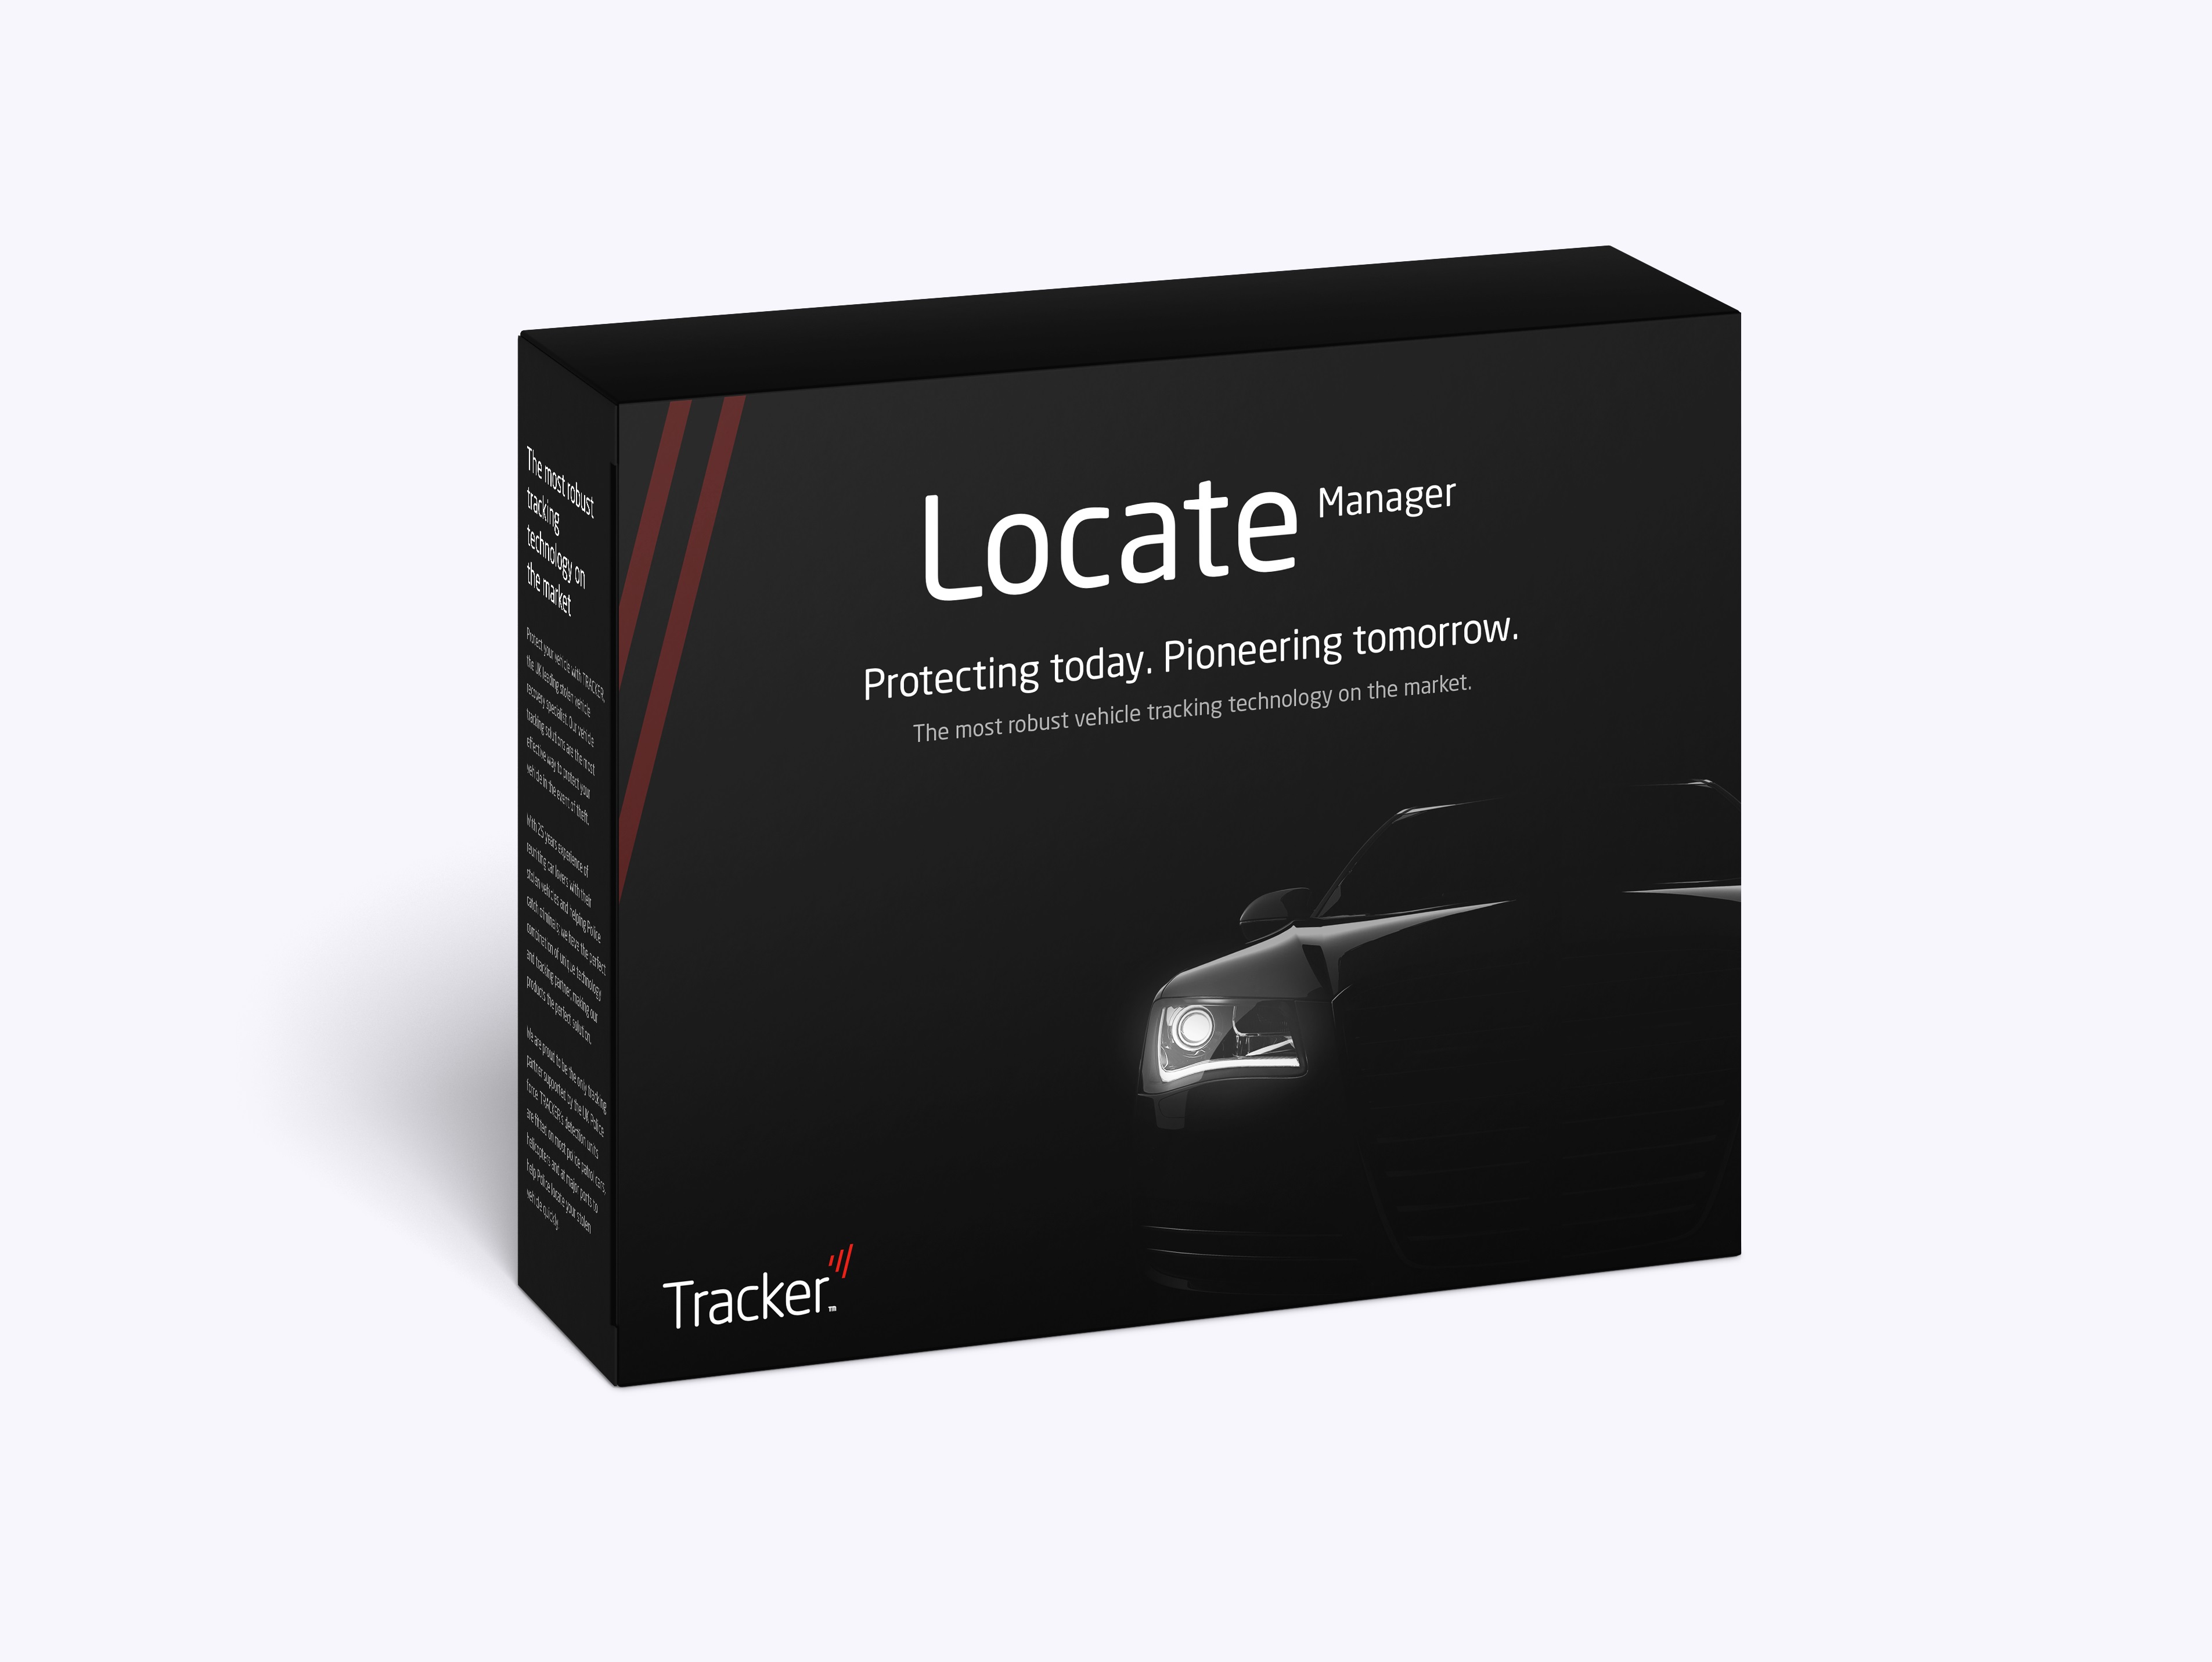 Locate Manager packaging